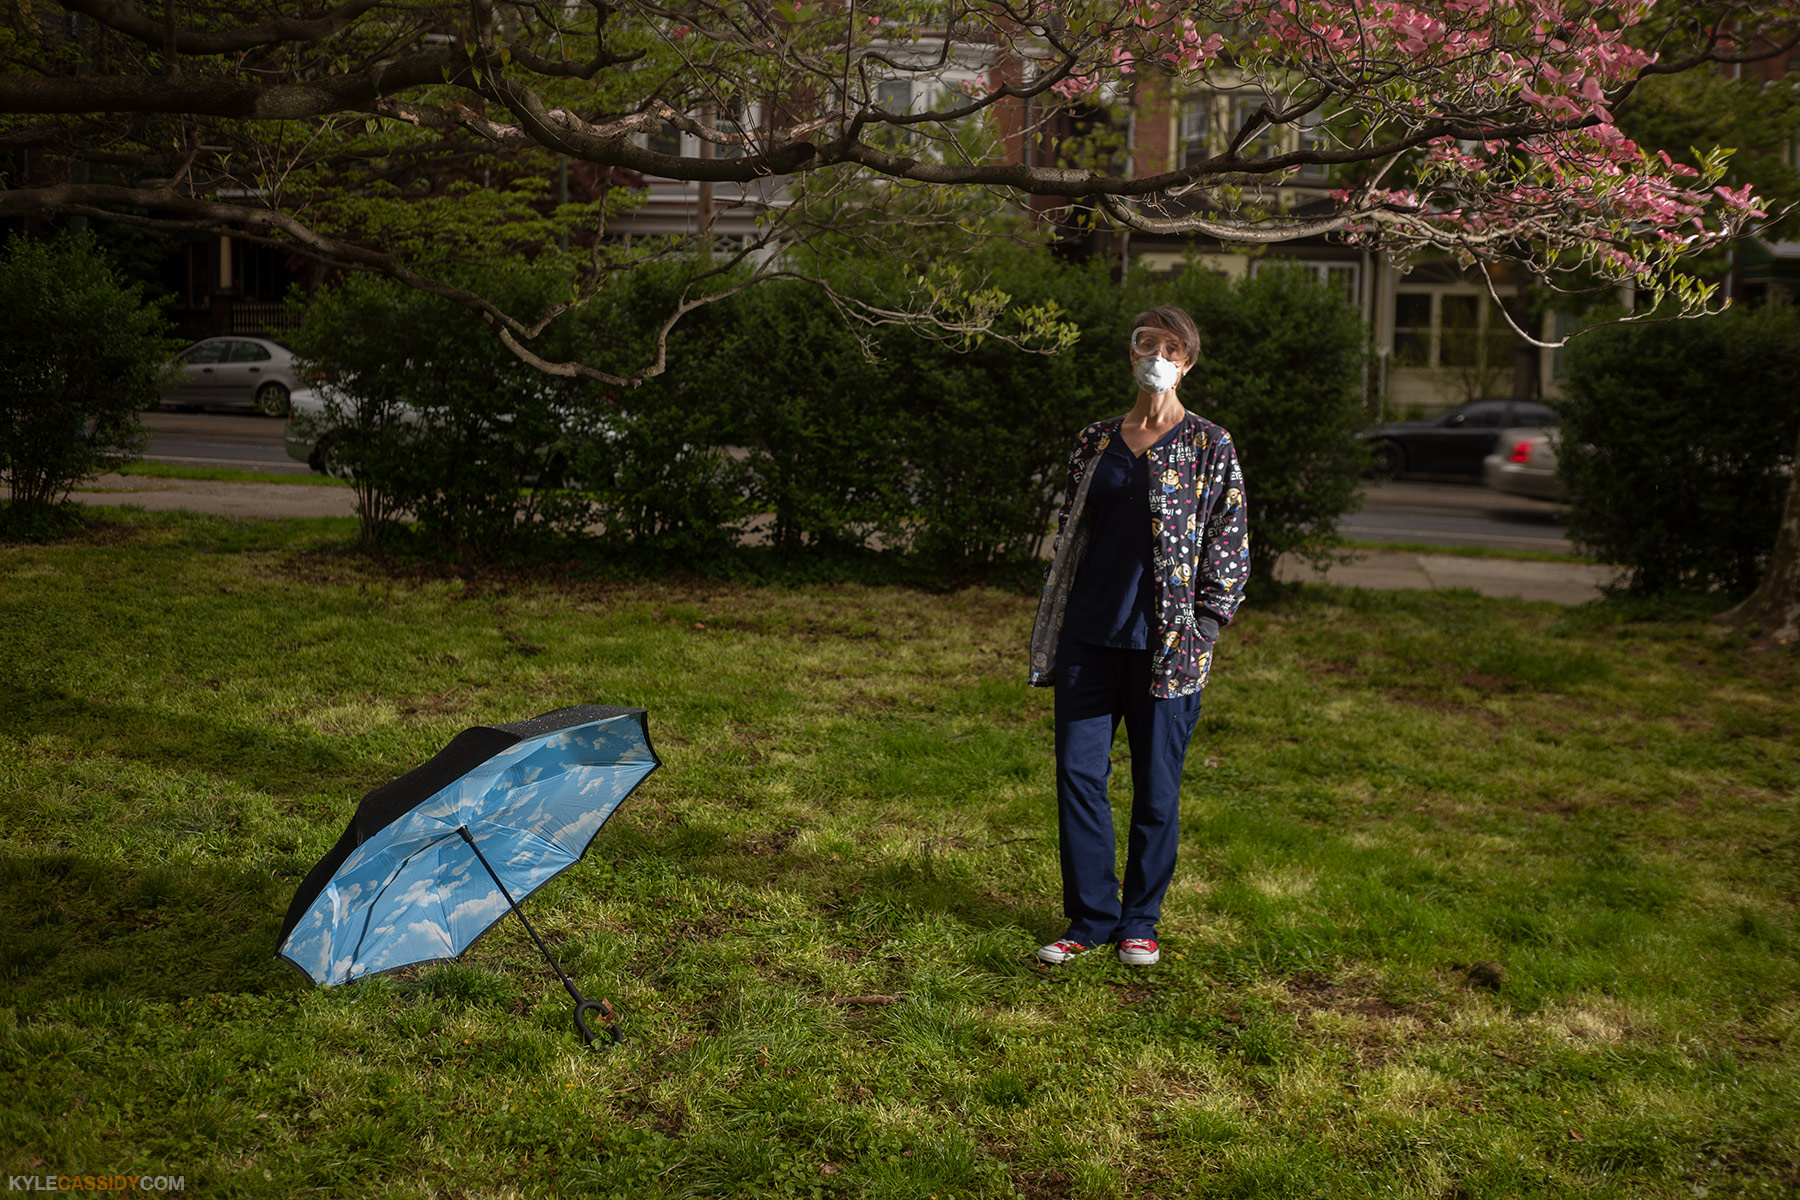 Karen wearing hospital scrubs standing in a park with an open umbrella on the ground next to her. She is wearing a surgical mask.